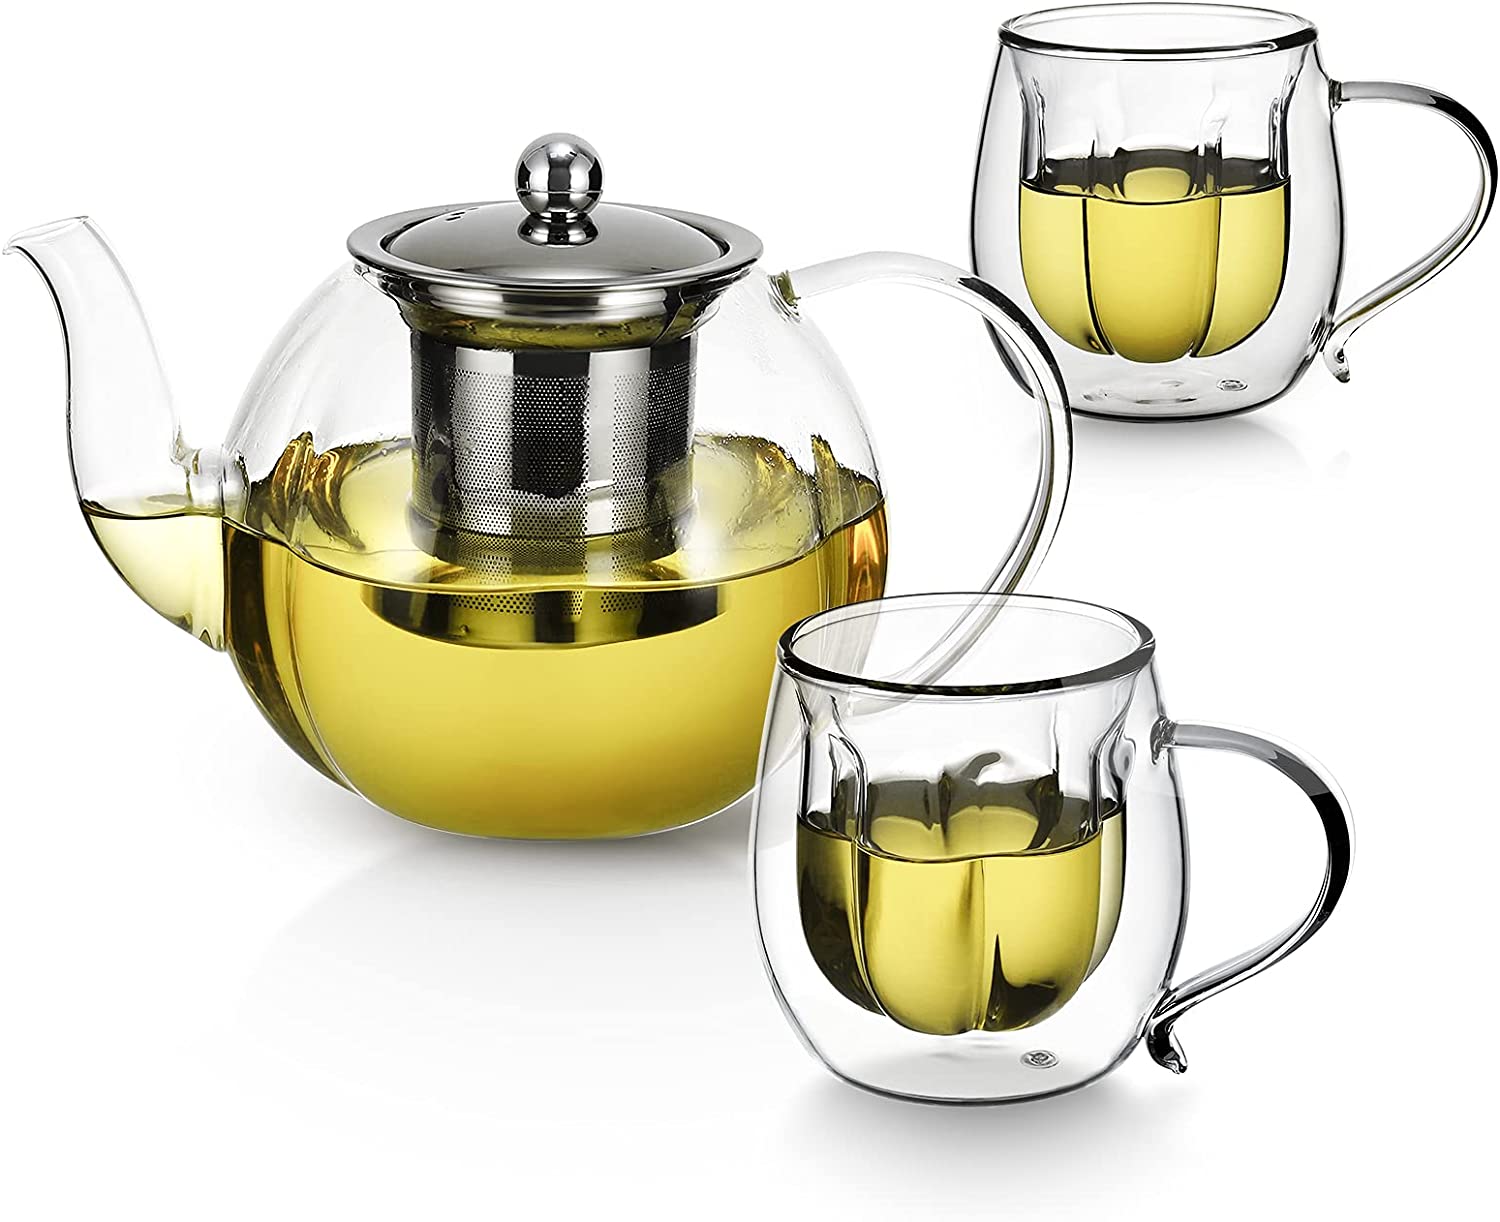 Vzaahu Teapot Set Made of Double-Walled Borosilicate Glass, 1000 ml with Removable Stainless Steel Strainer, 2 Glass Cups in Flower Shape, Thermal Glass with Handle, Father\'s Day Gift